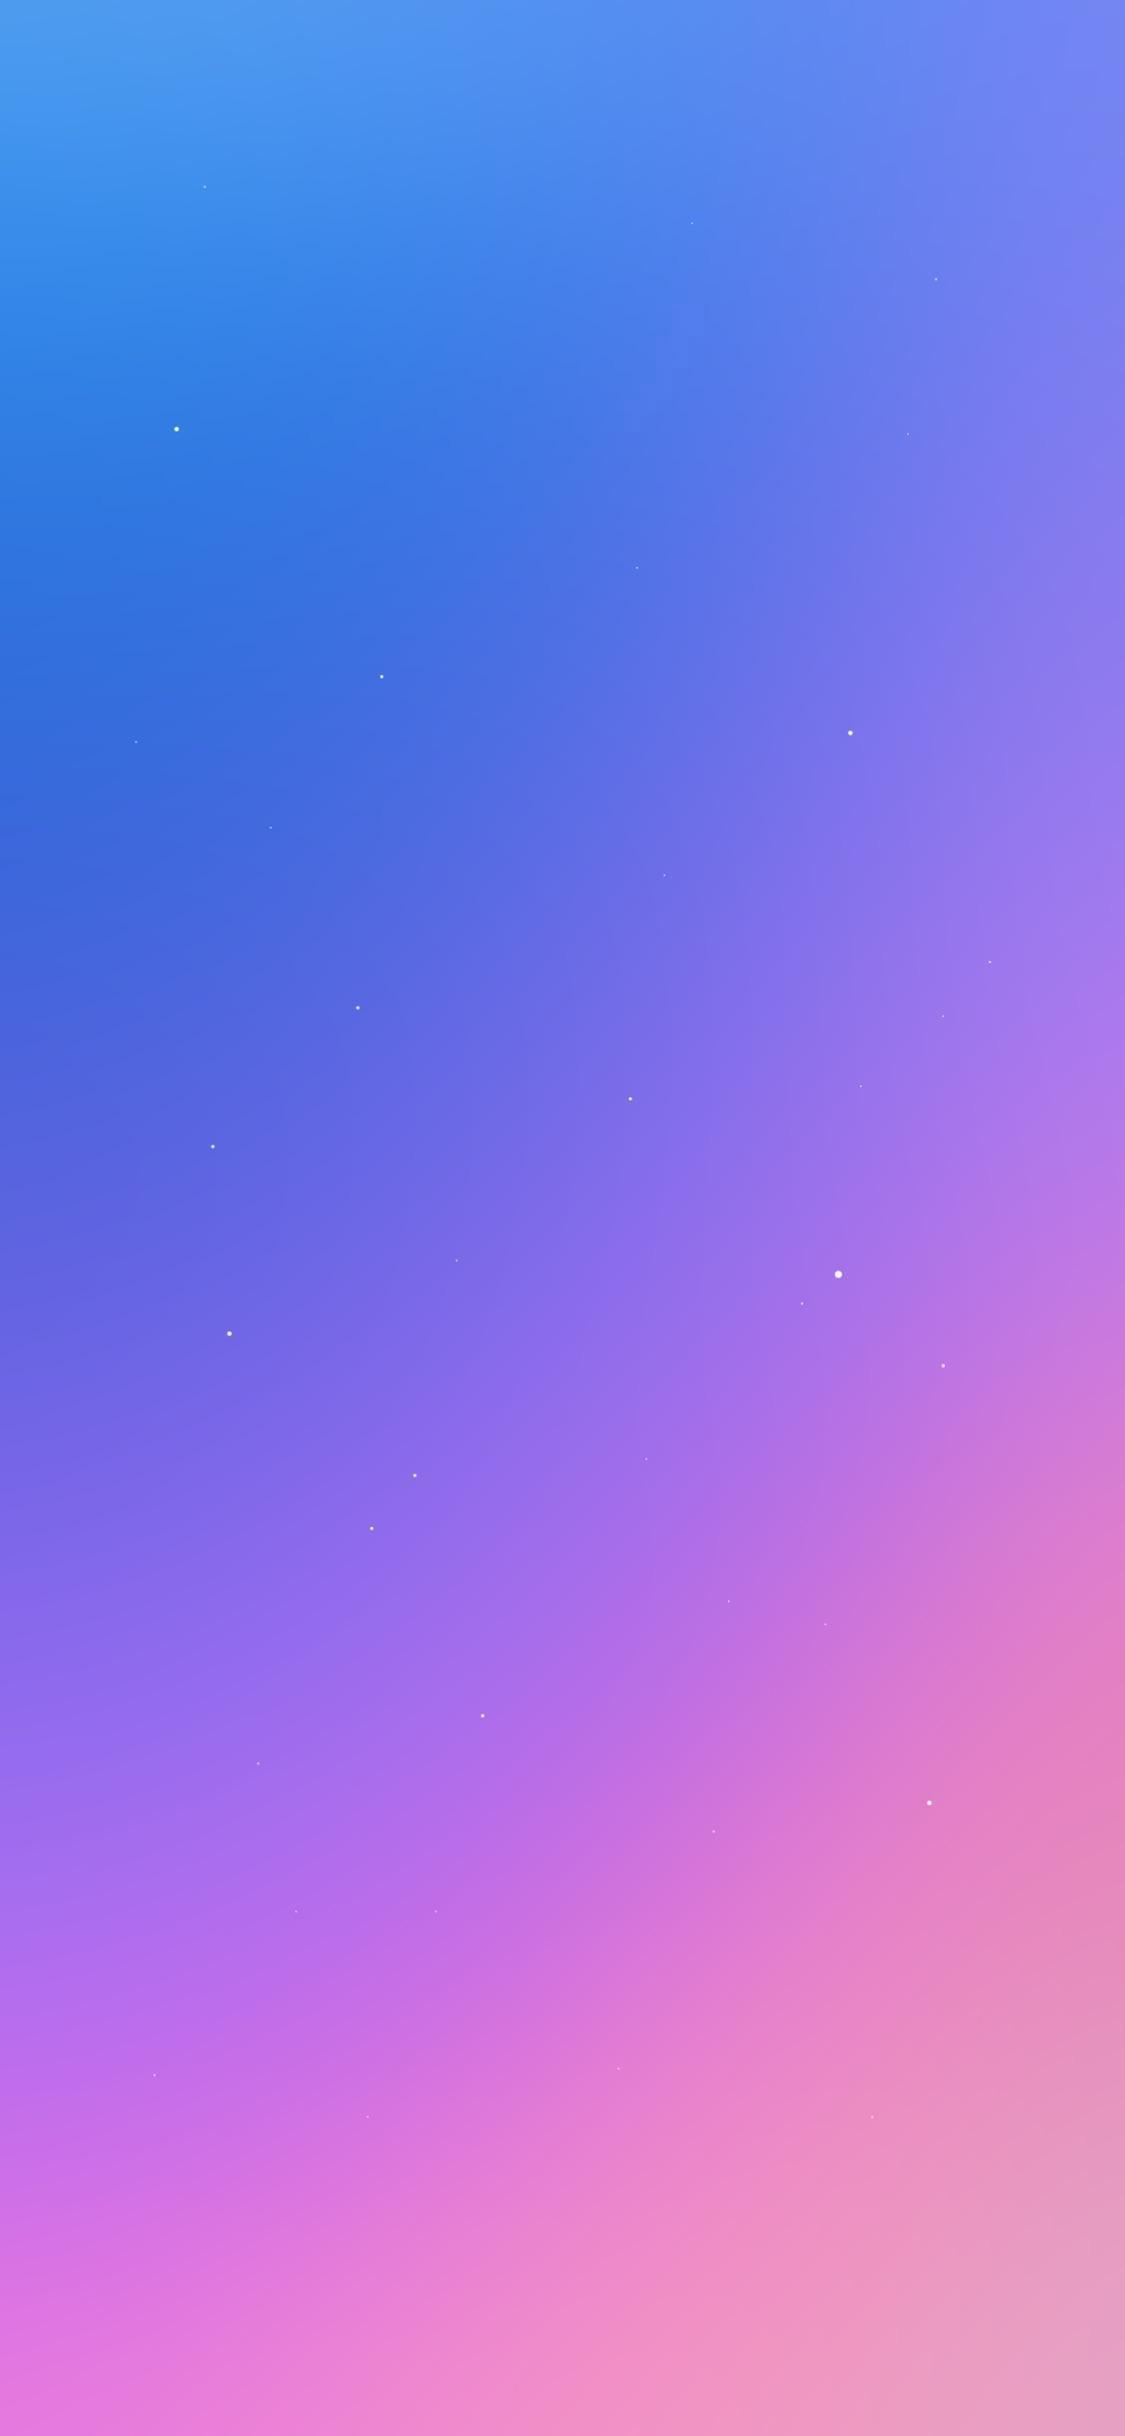 Anyone have any gradient wallpaper like this for the xs max